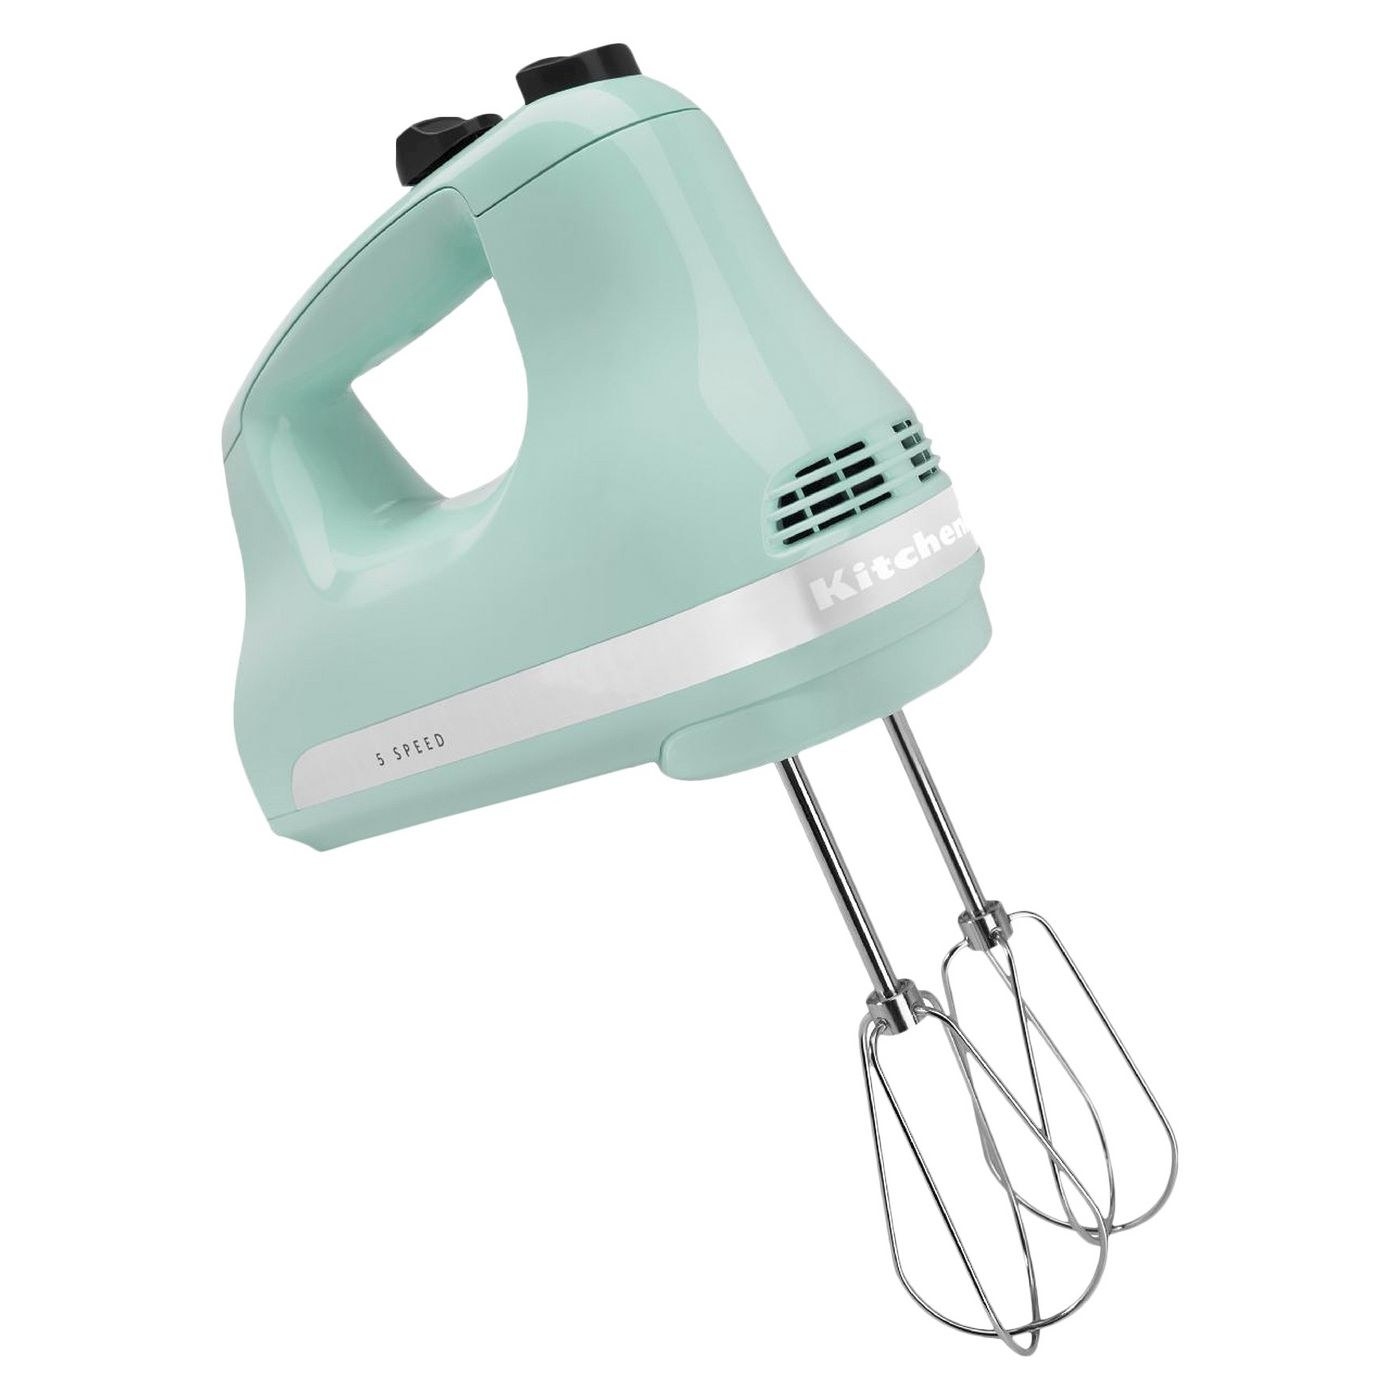 The hand mixer in the color blue ice